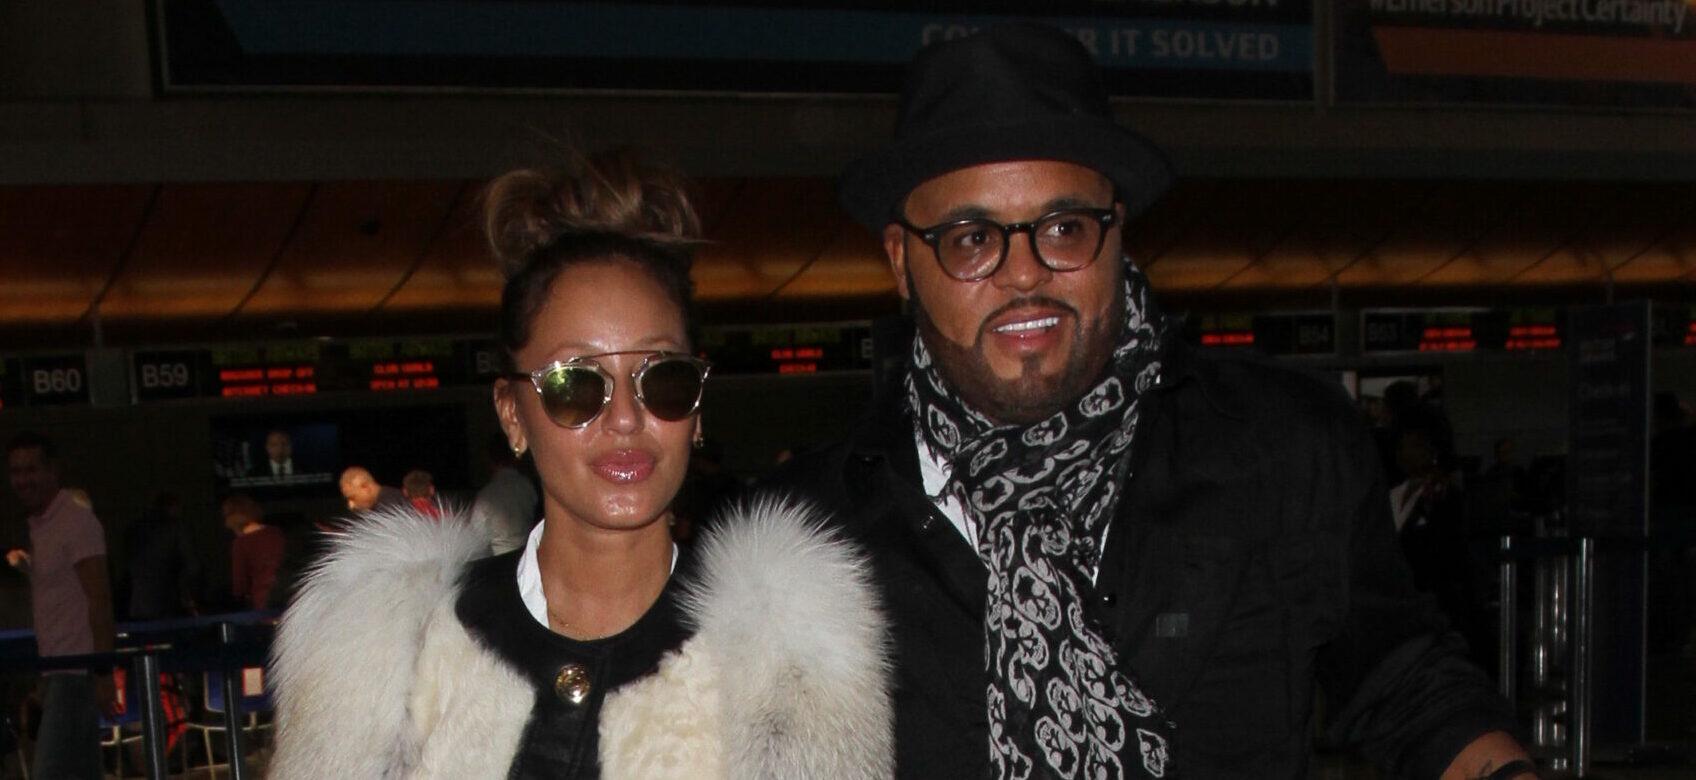 Adrienne Bailon and her husband Israel Houghton depart from Los Angeles International Airport (LAX)